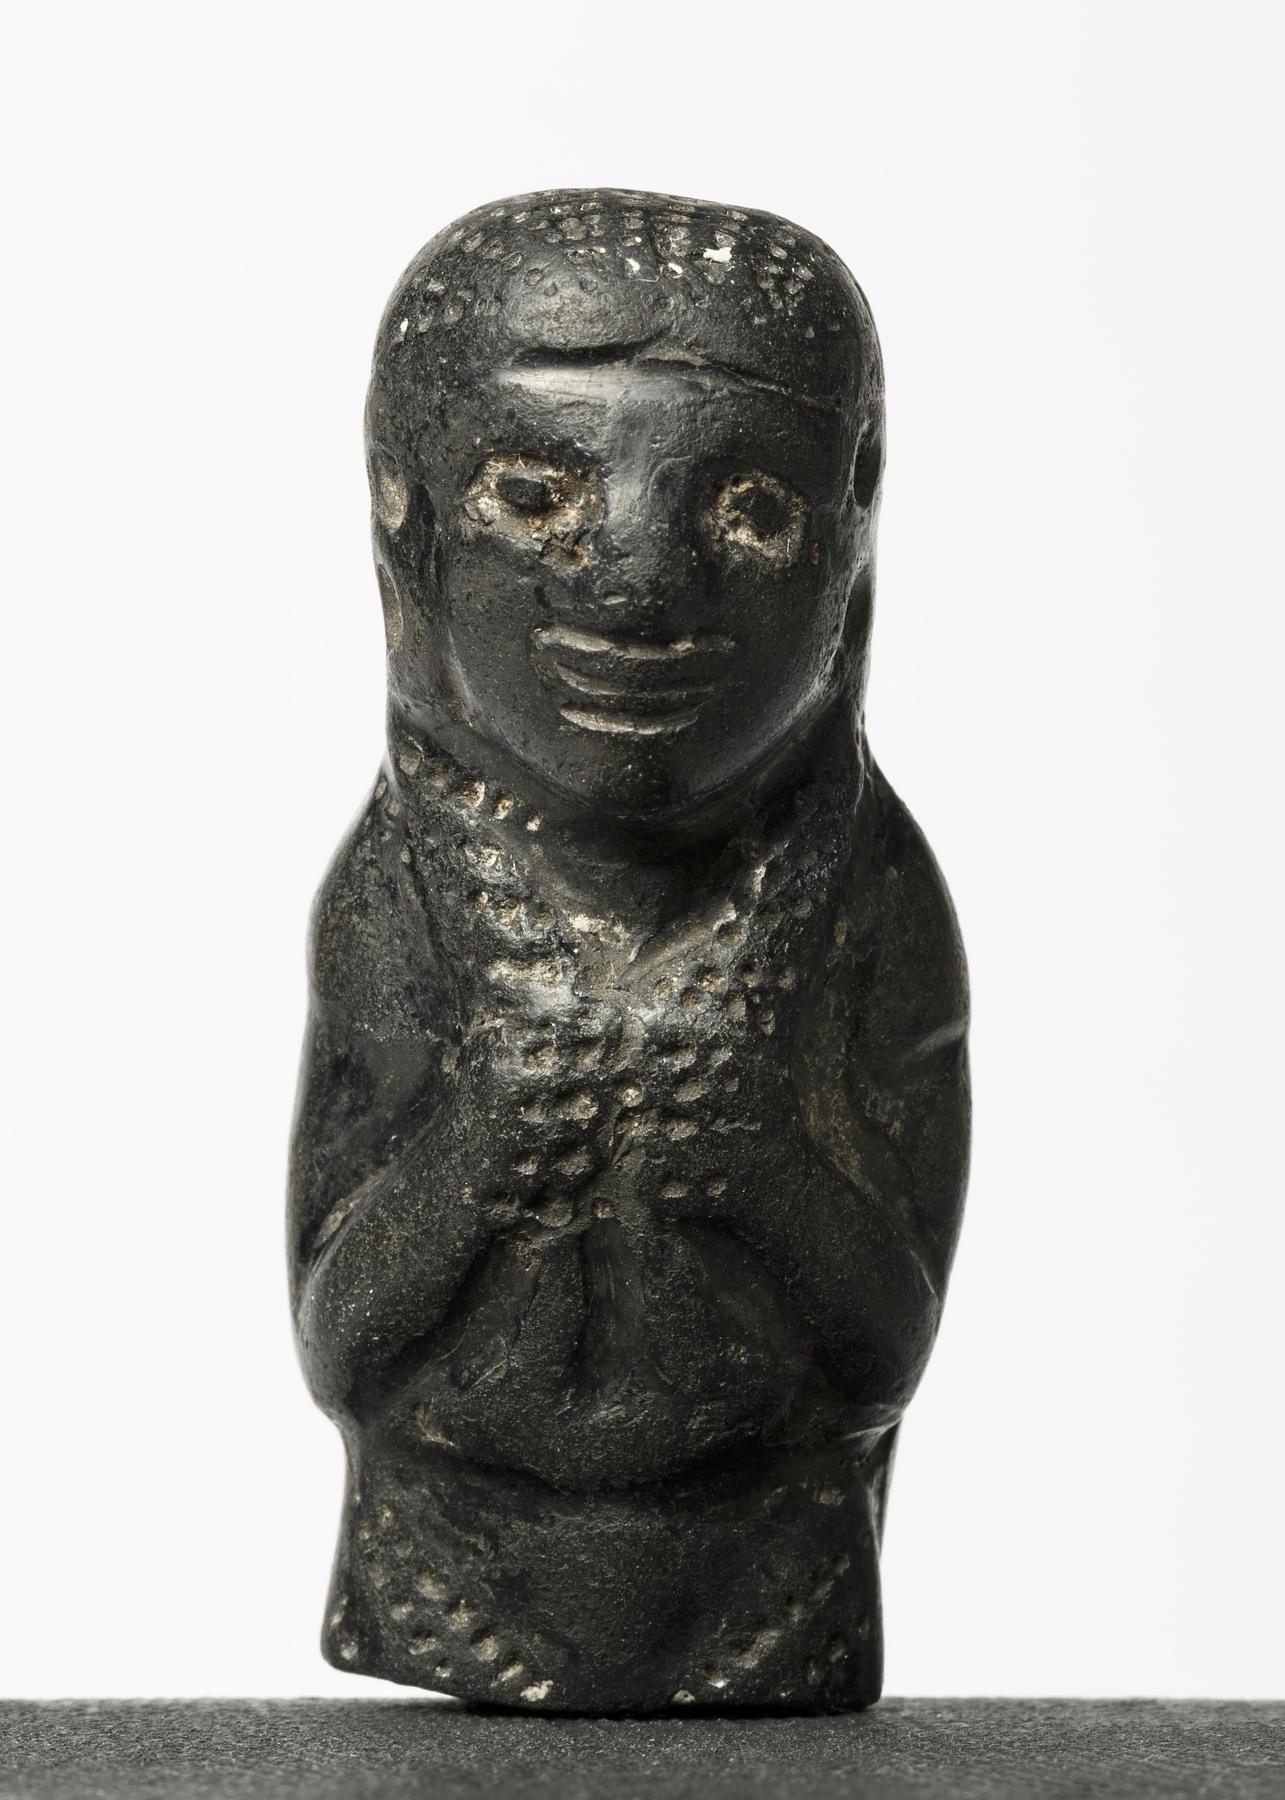 Vessel fitting in the shape of a female figure, H1025